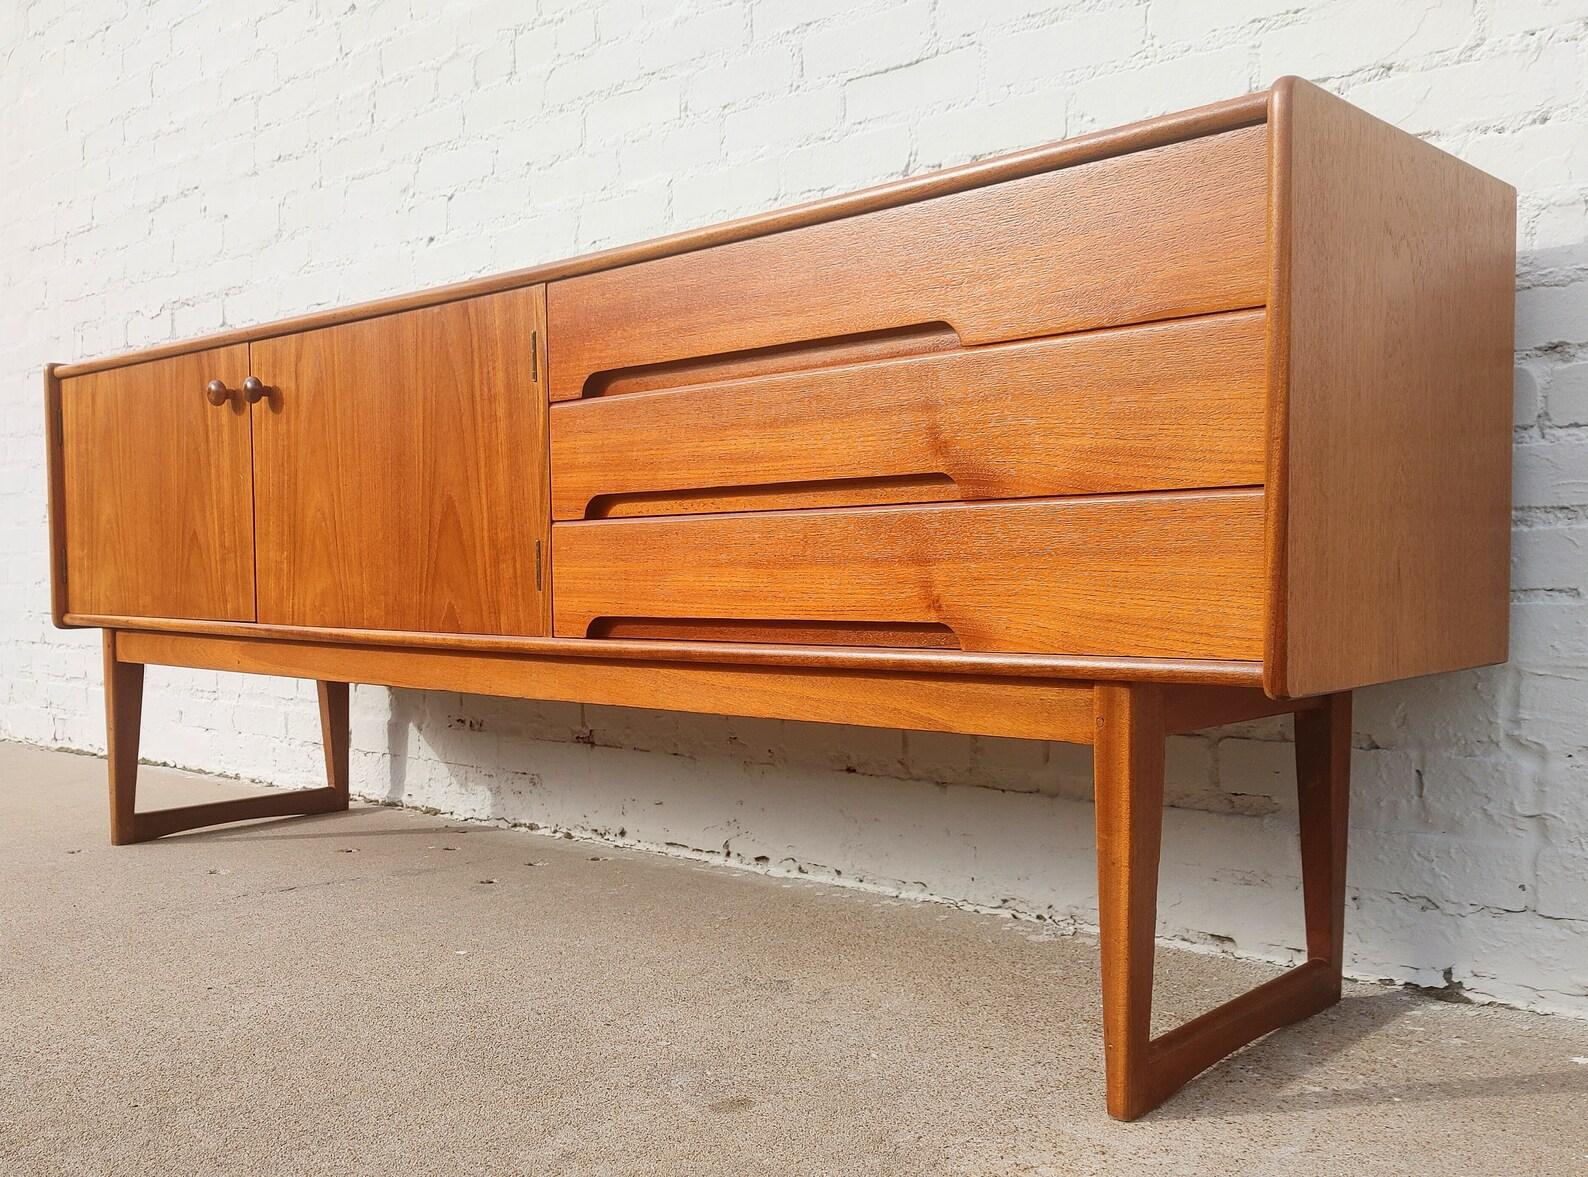 Mid Century Danish Modern Teak Sideboard

Above average vintage condition and structurally sound. Has some expected slight finish wear and scratching. Outdoor listing pictures might appear slightly darker or more red than the item does indoors.